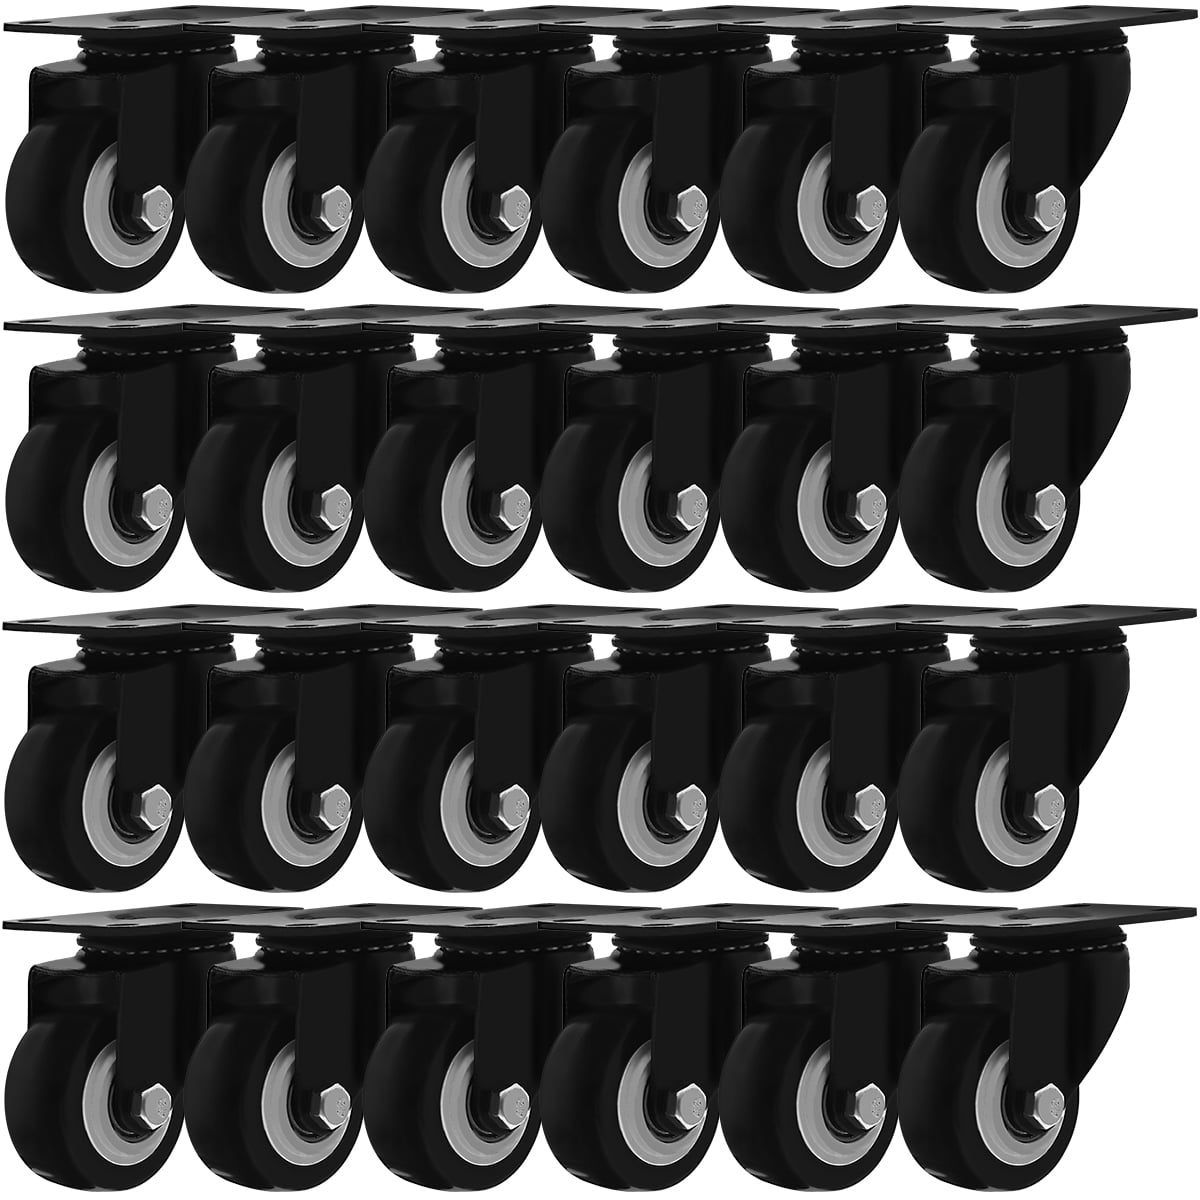 Caster Wheels Rubber Base w/ Top Plate & Bearing 24 Pack 2" NO Brake 